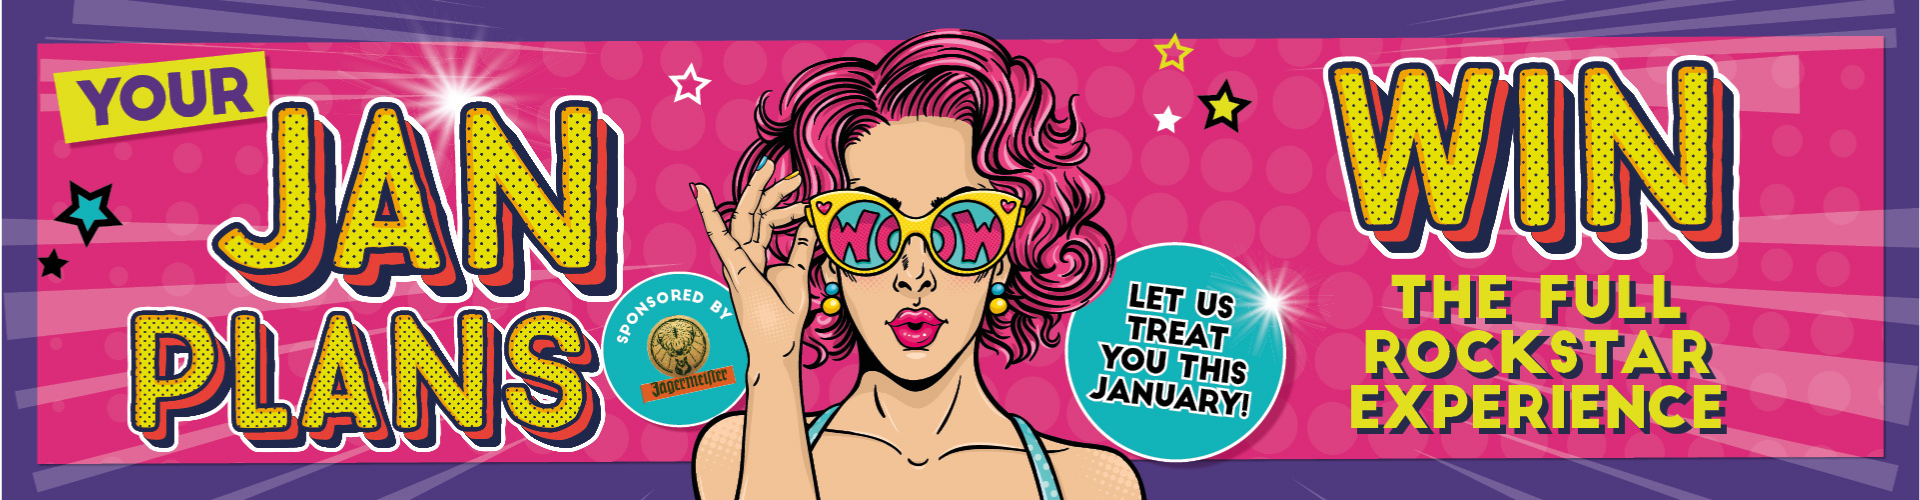 Popworld Your Jan Plans! Win the full Rockstar Experience with Jagermeister